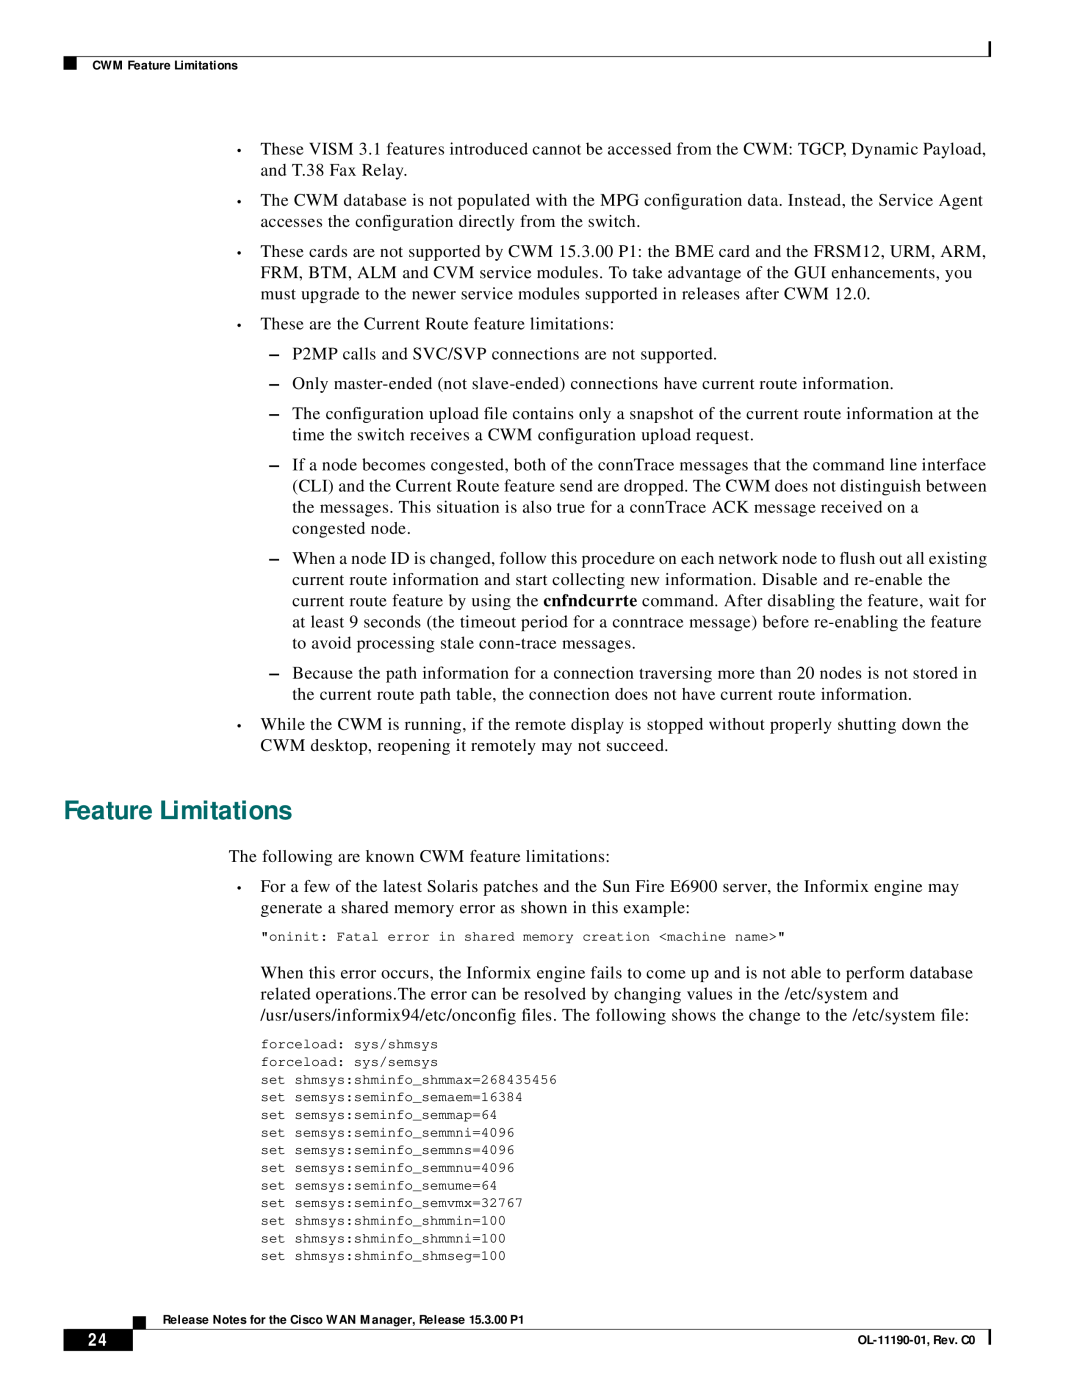 Cisco Systems 15.3.00P1 manual Feature Limitations 